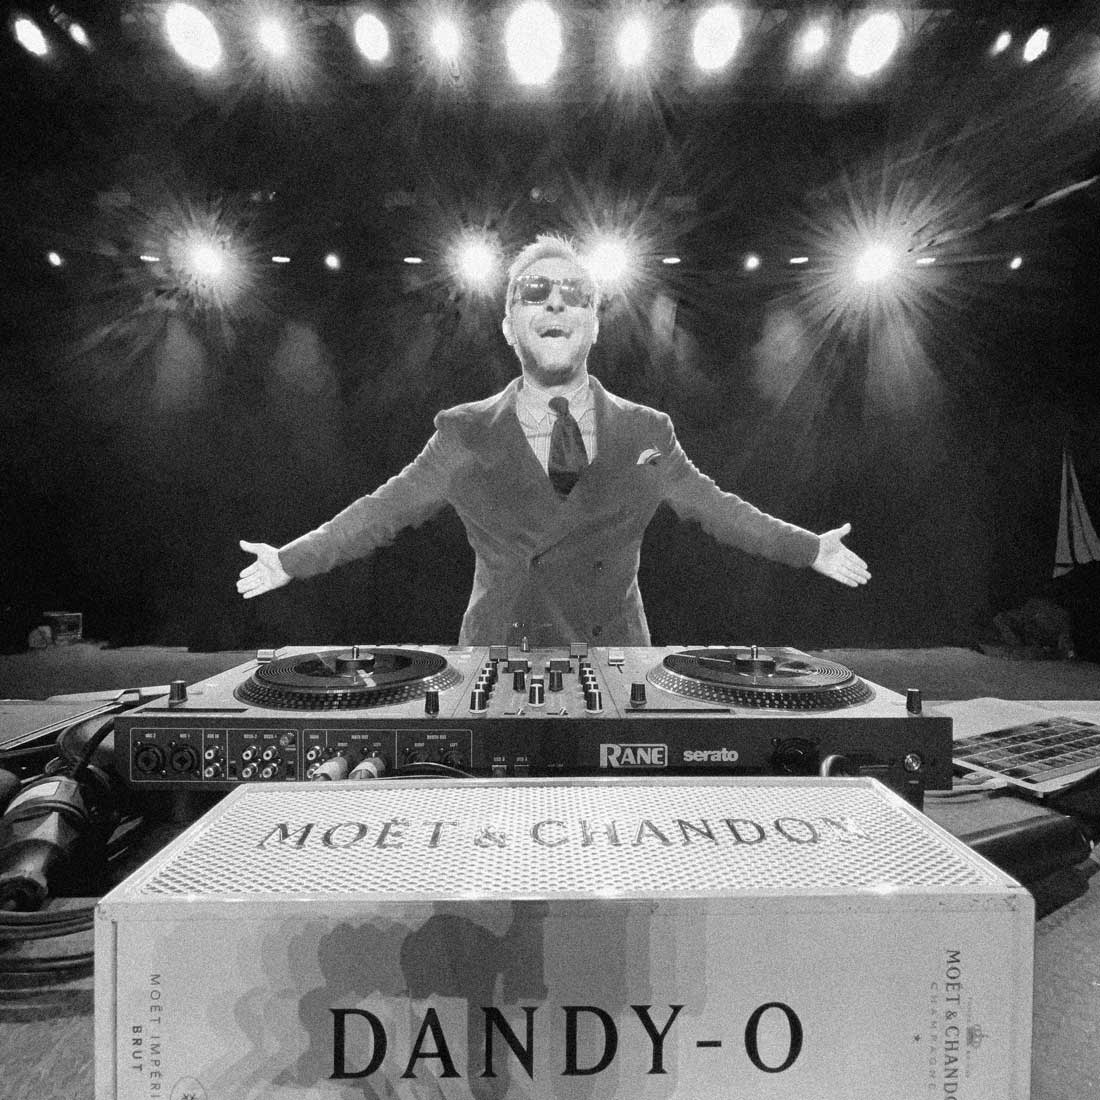 DJ Dandy O. behind the turntables, celebrating with Moet & Chandon champagne right in front of him.